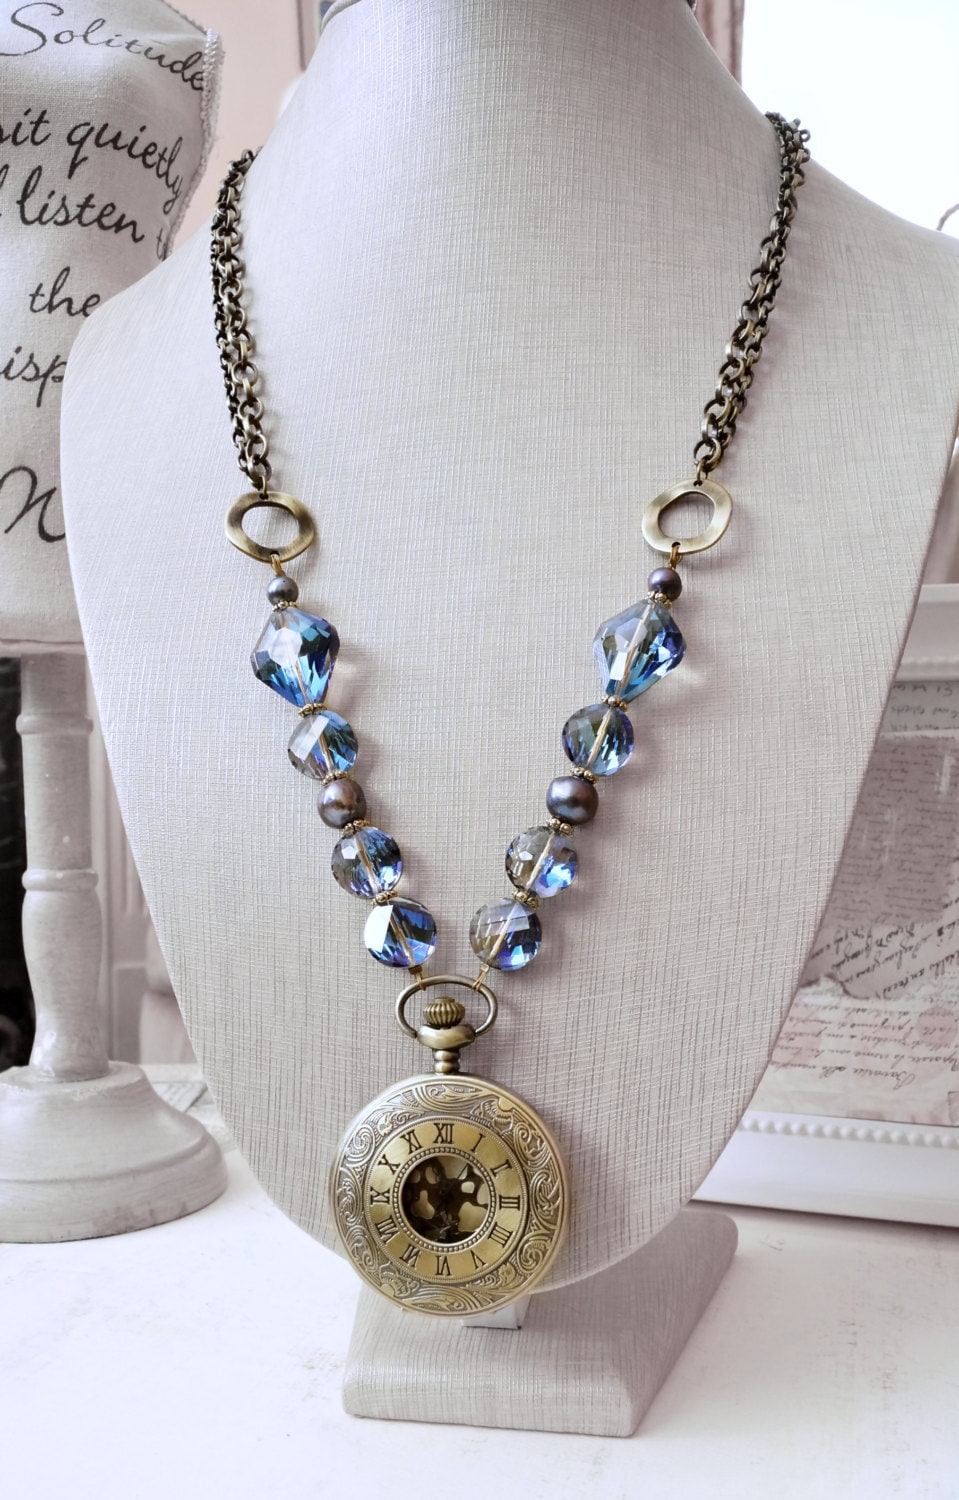 Purple and Blue Lariat Pocket Watch Necklace Steampunk | Etsy